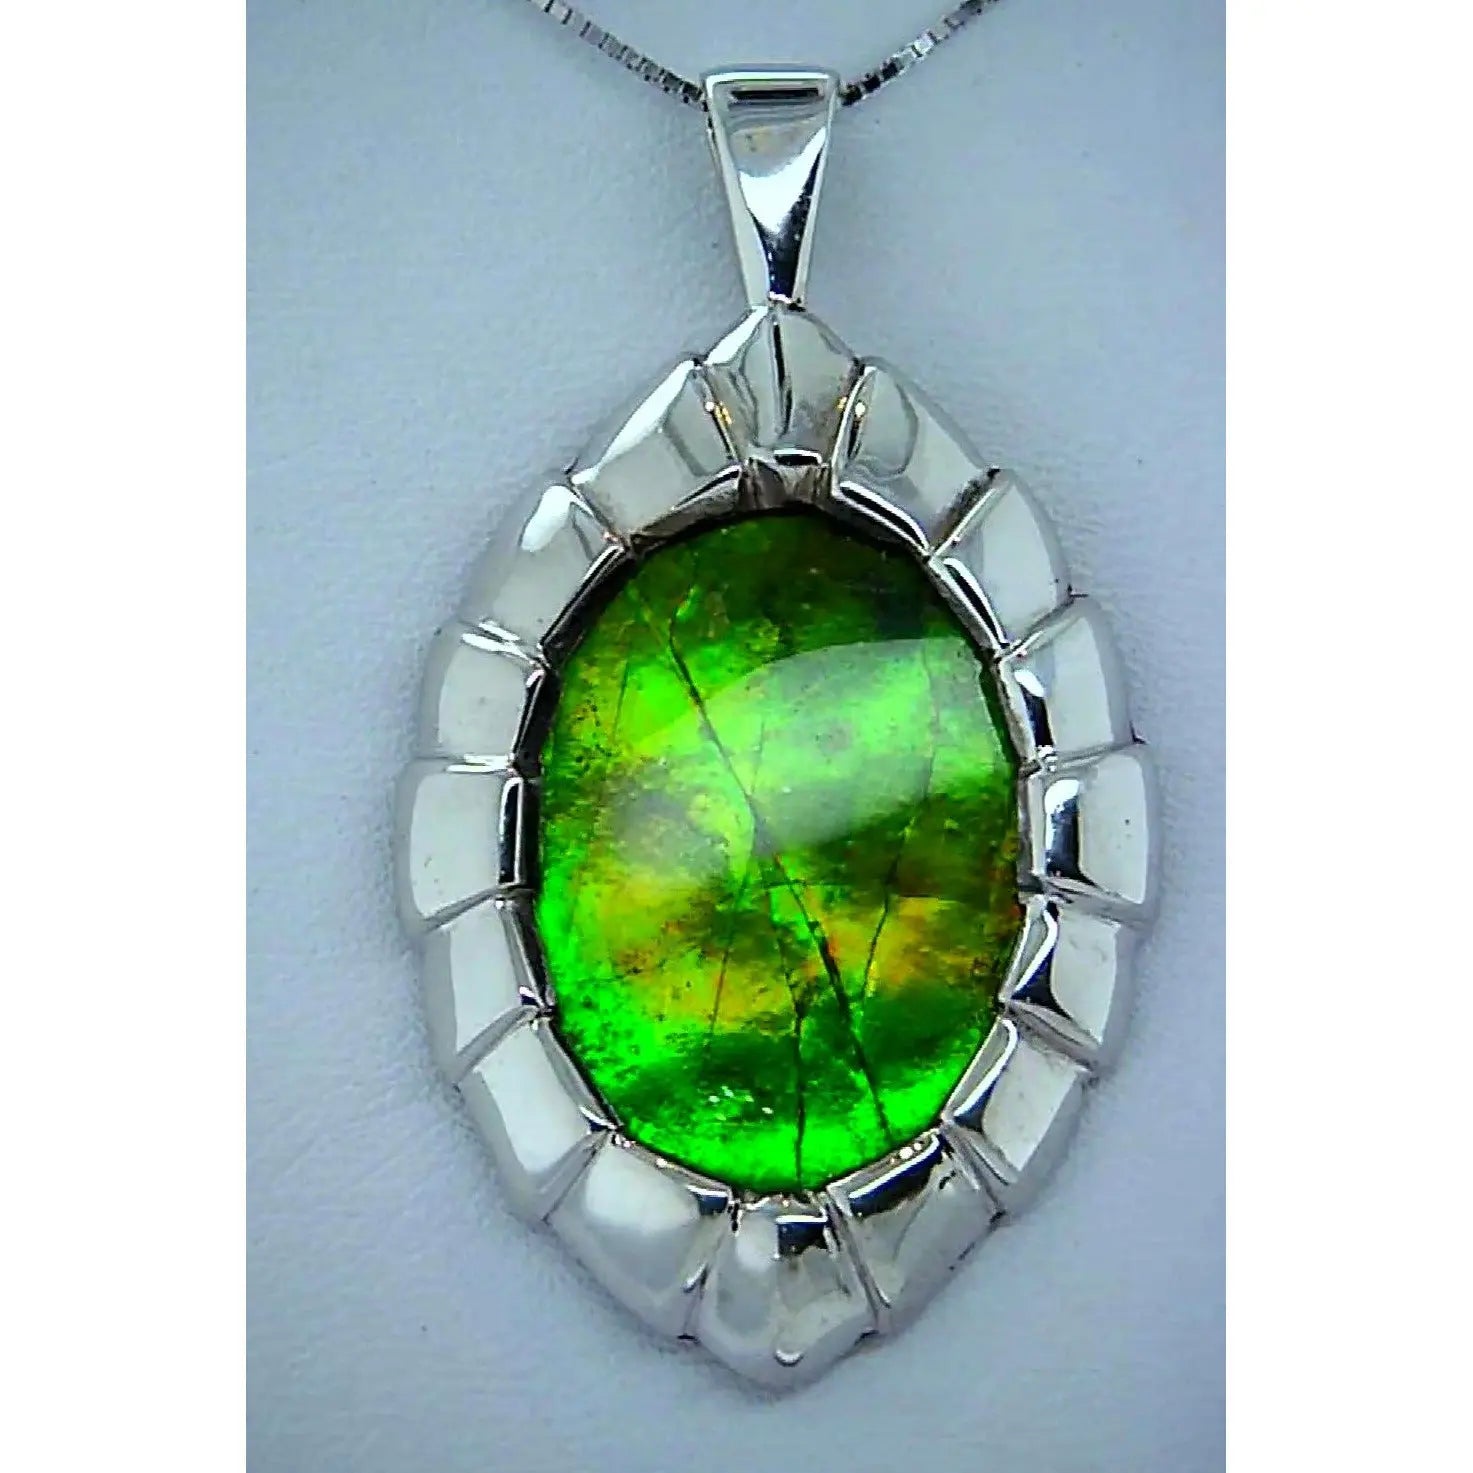 Ammolite Sterling Silver Pendant with 18x25mm Gemstone Pn: E20913 %product from Empire Ammolite